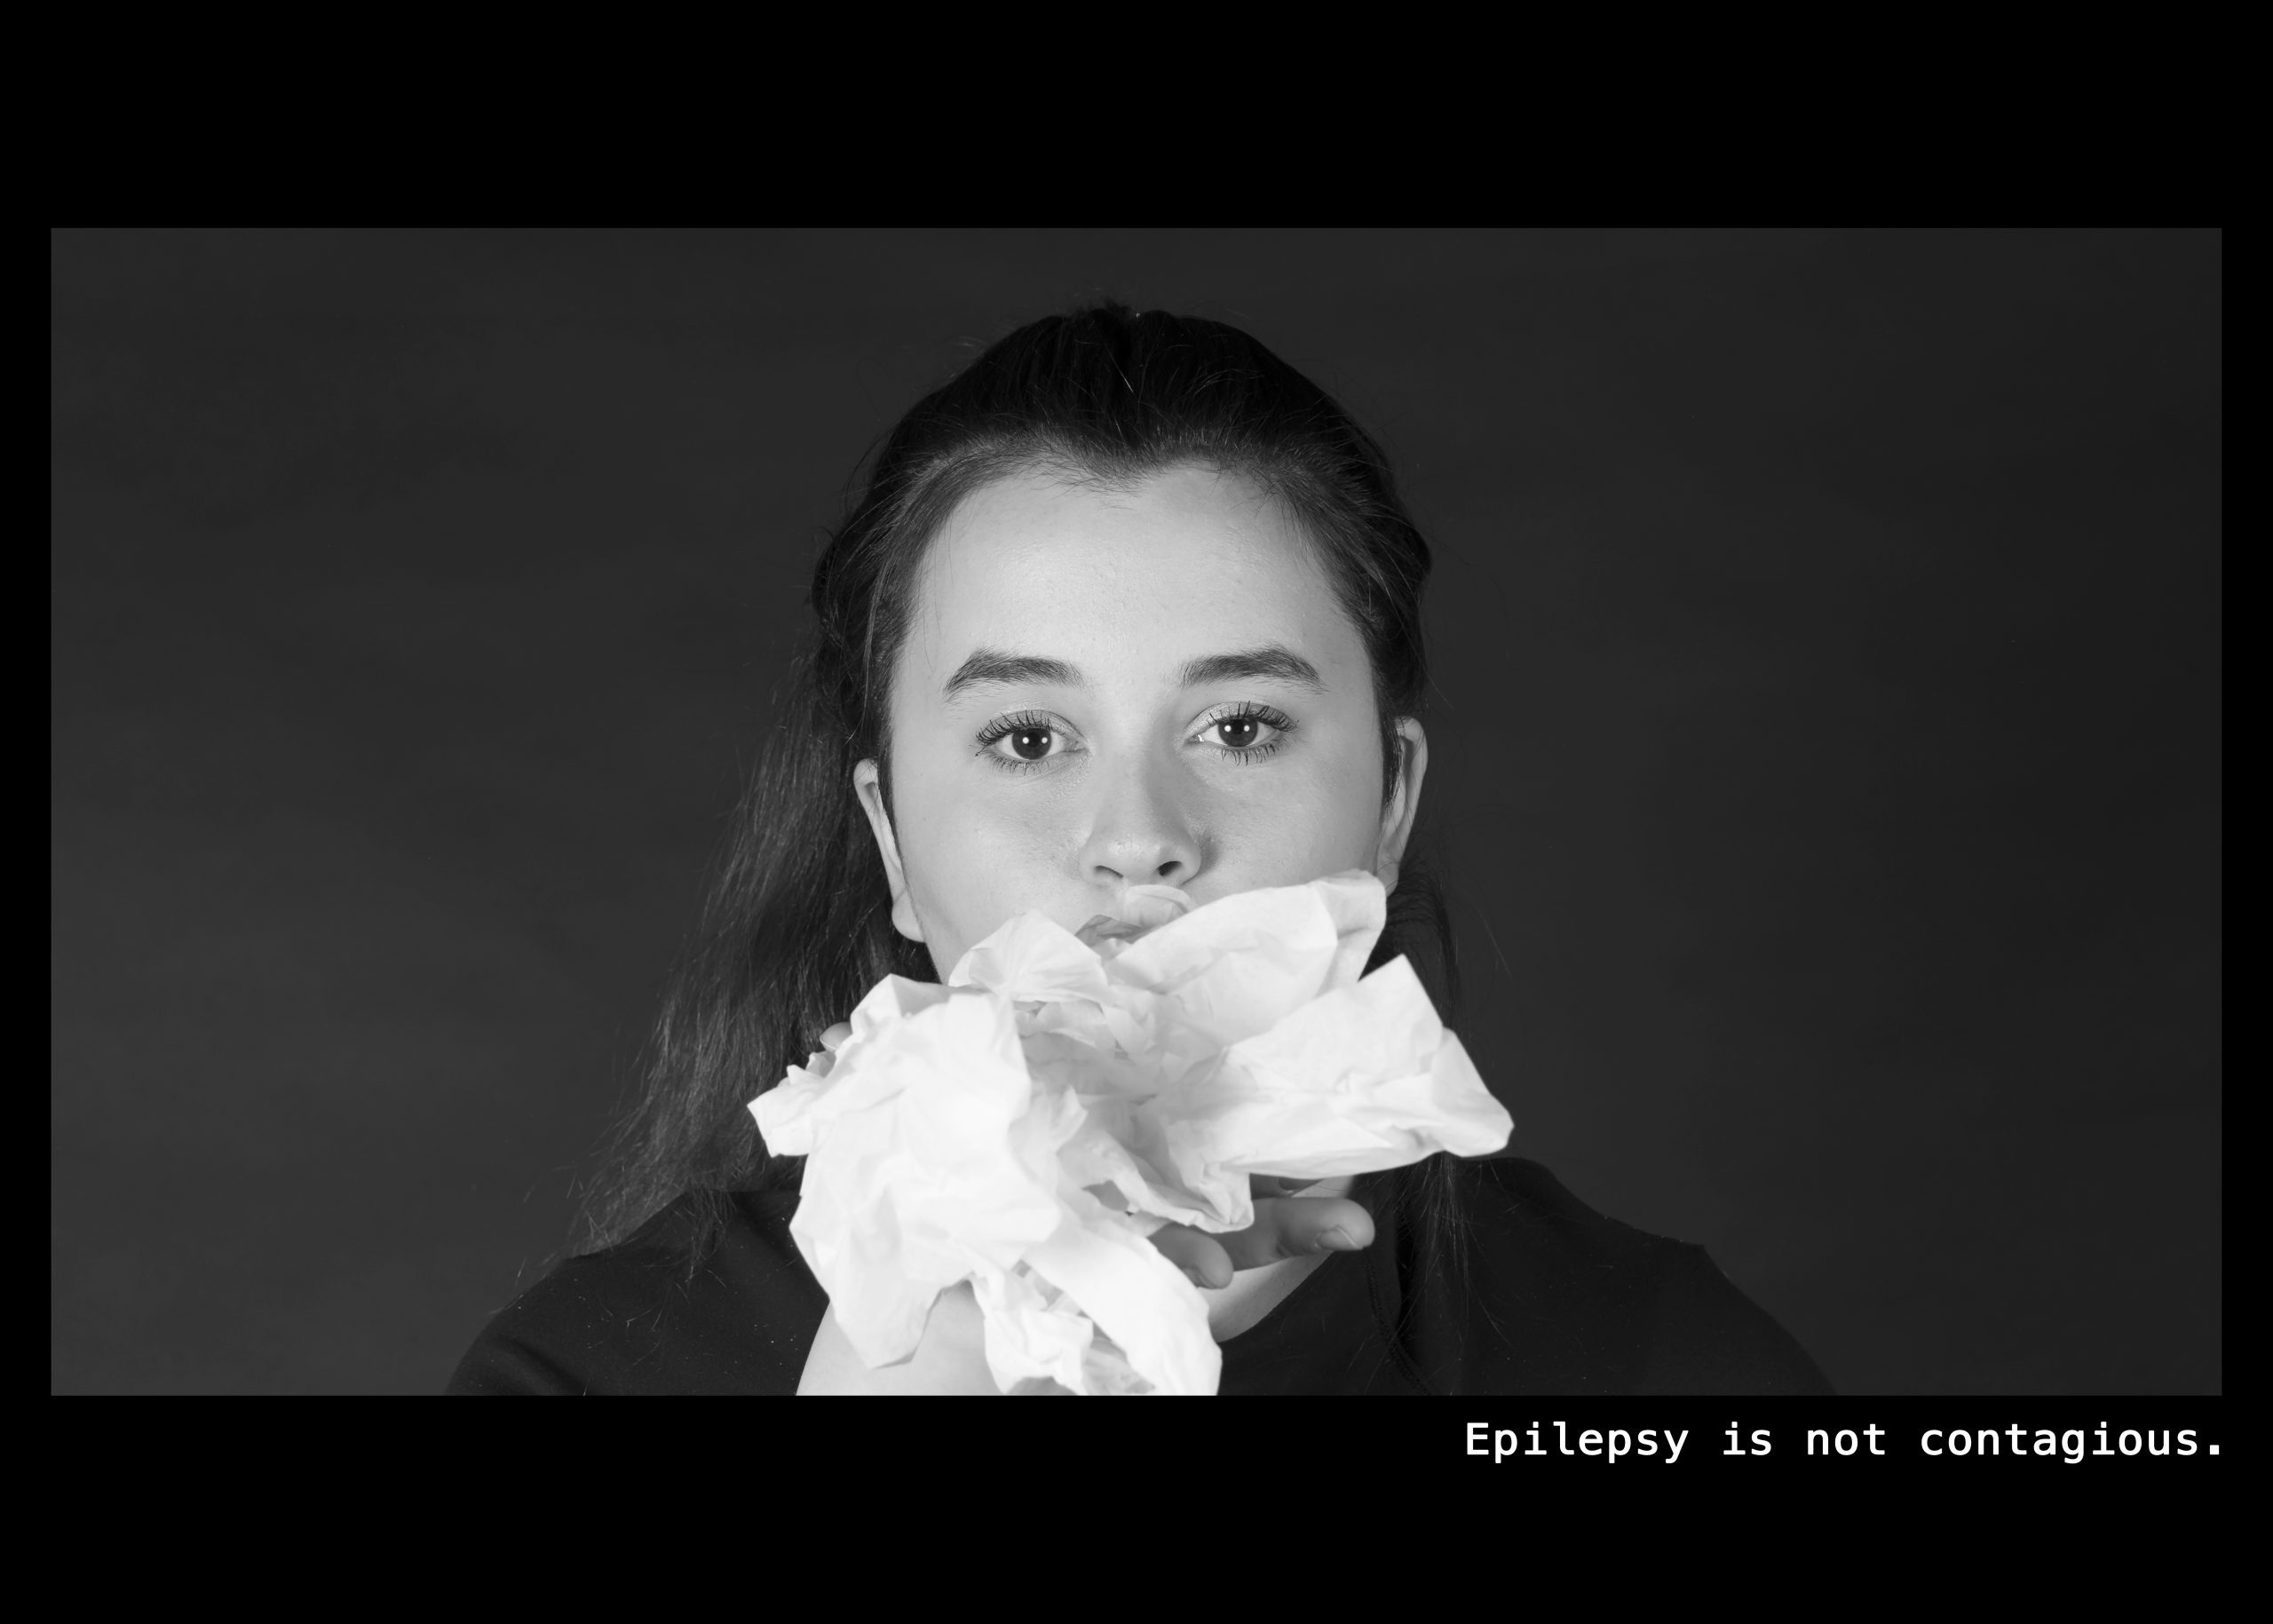 Image of a woman with facial tissues coming out of her mouth. Text: Epilepsy is not contagious.